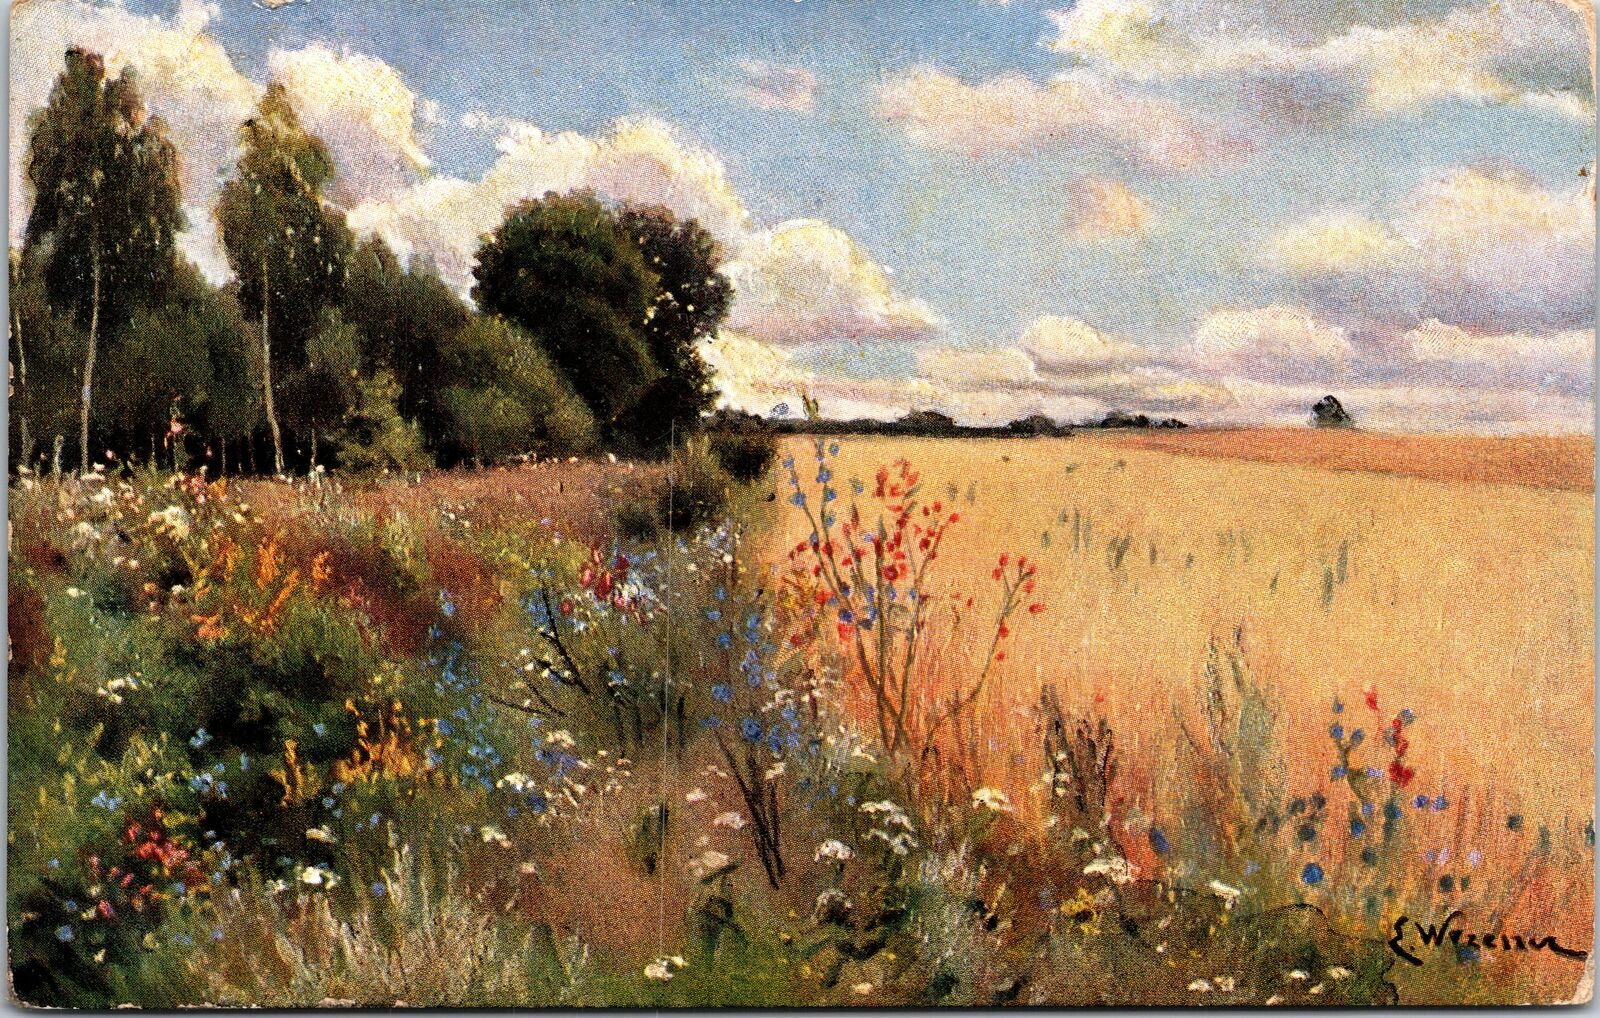 VINTAGE POSTCARD SCENERY OF A RUSSIAN WHEATFIELD PRINTED IN GERMANY c. 1907-1910